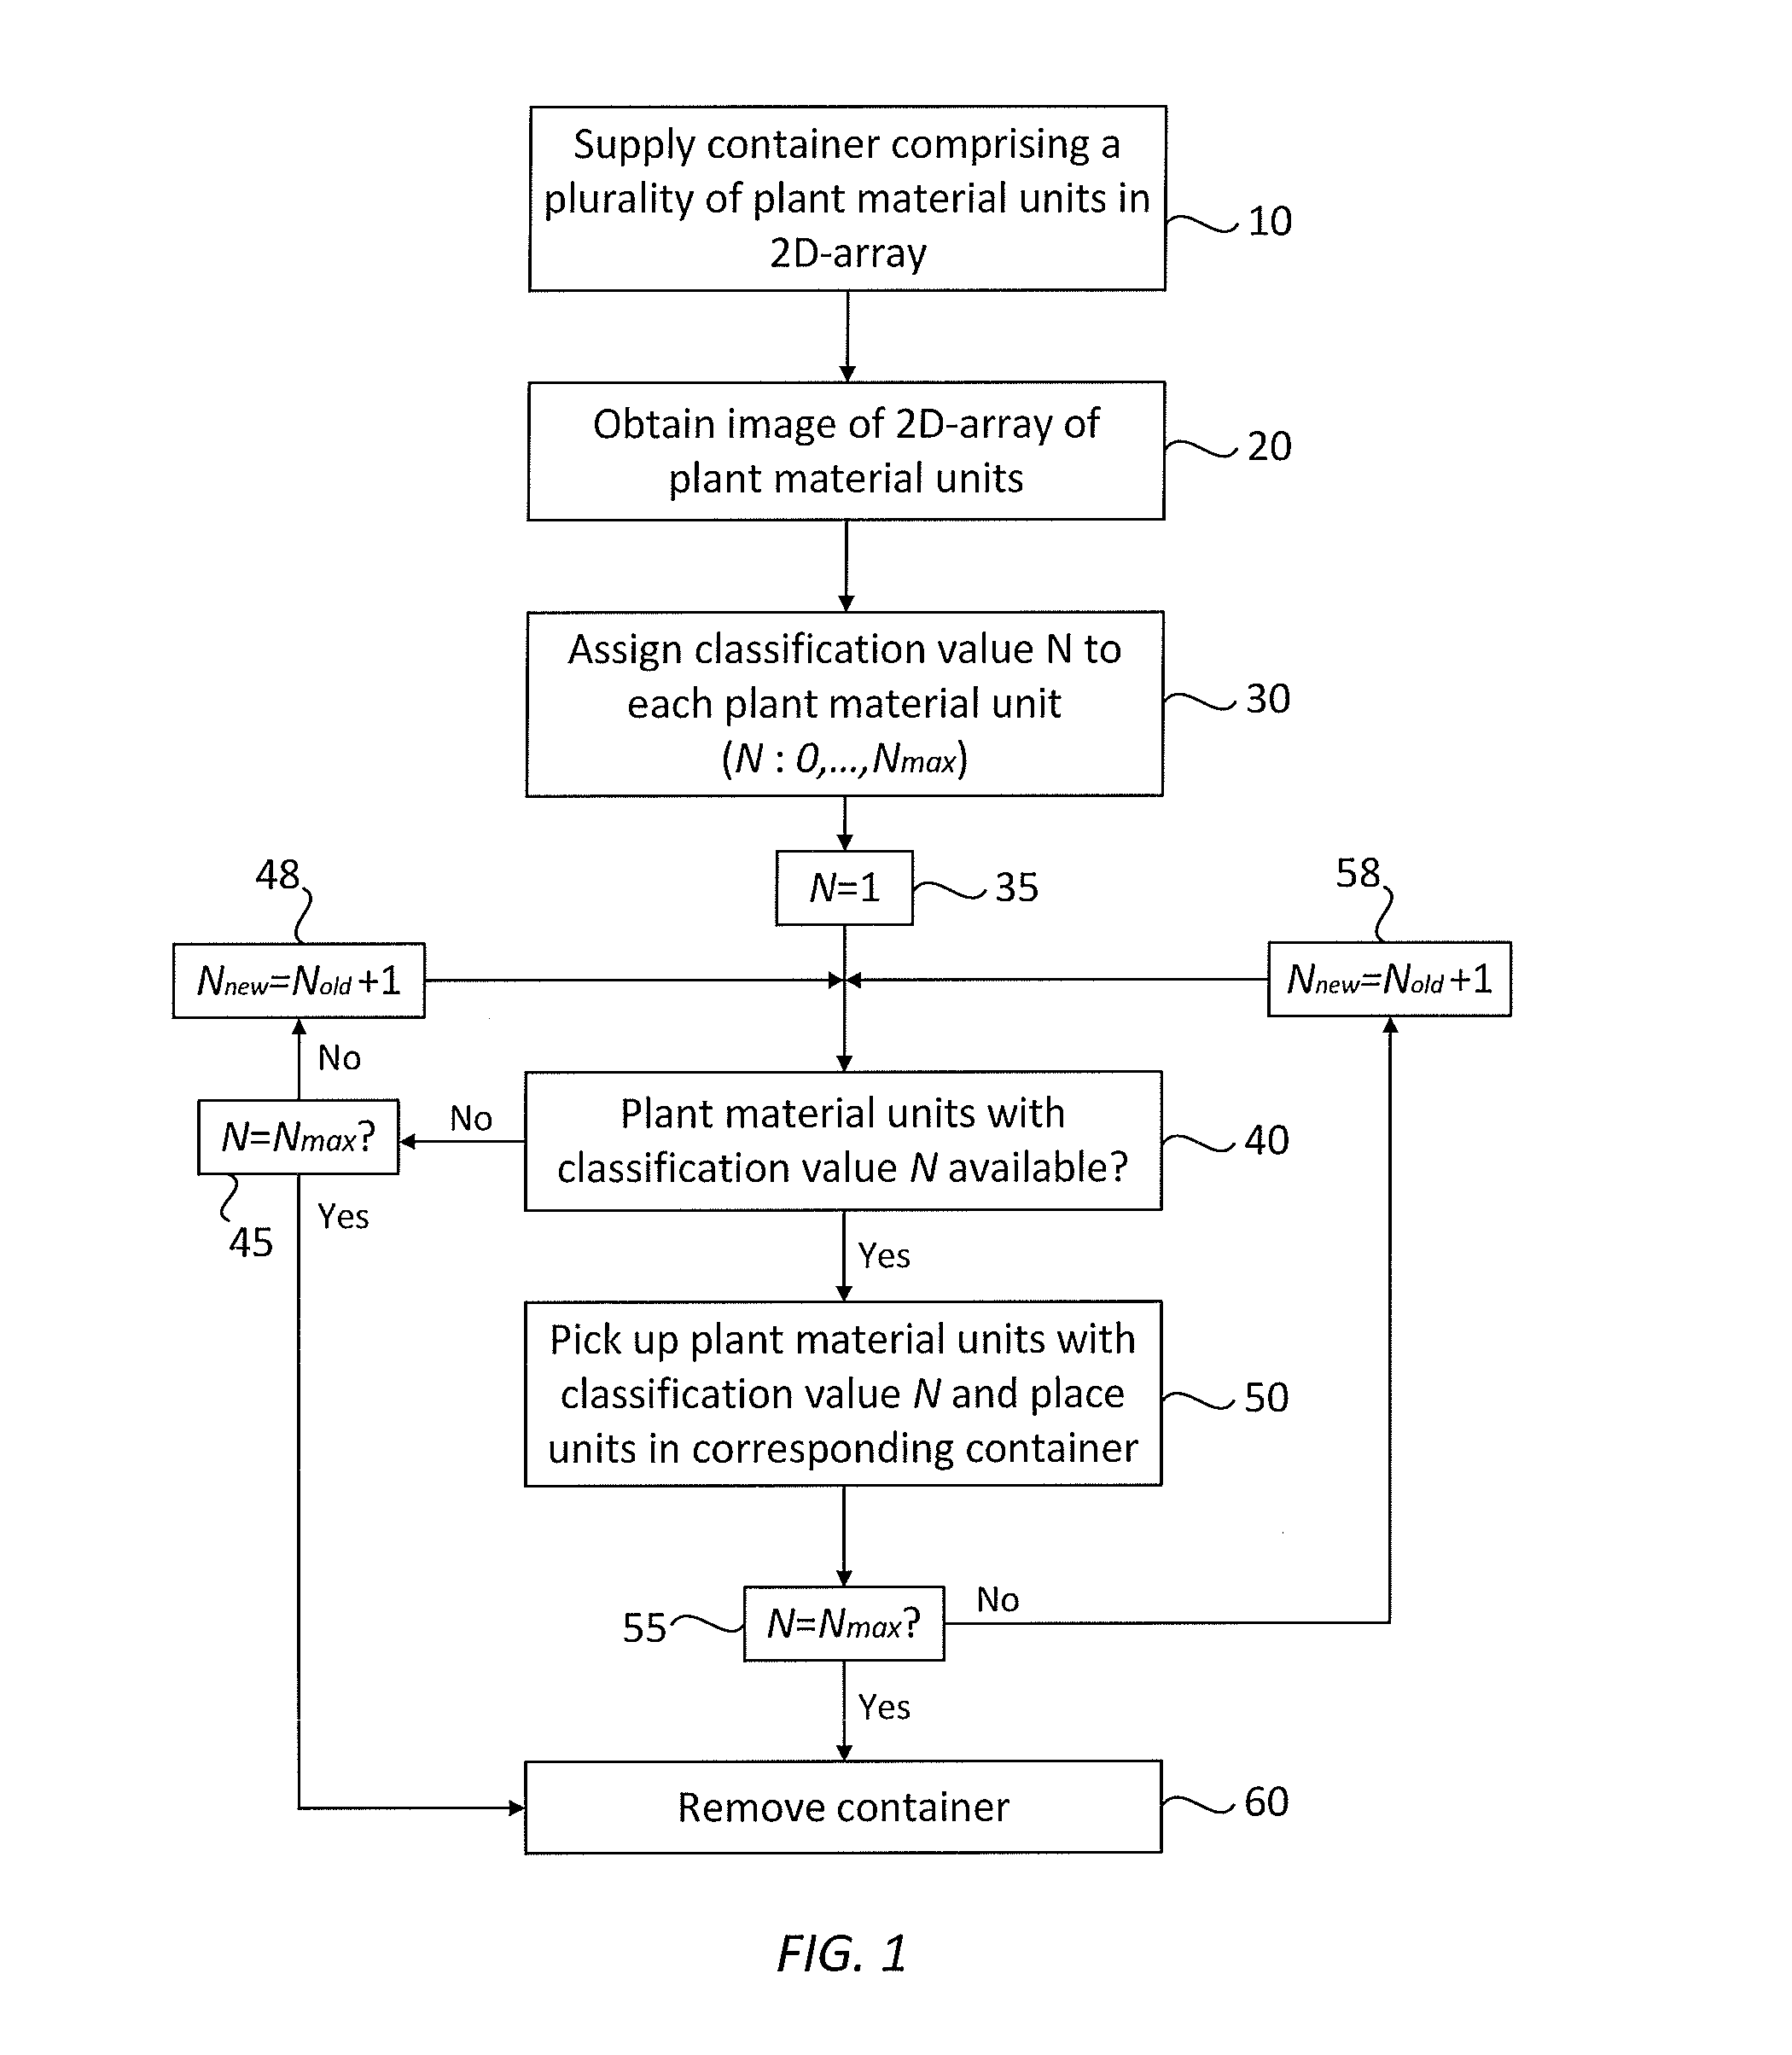 Apparatus and method for sorting plant material units